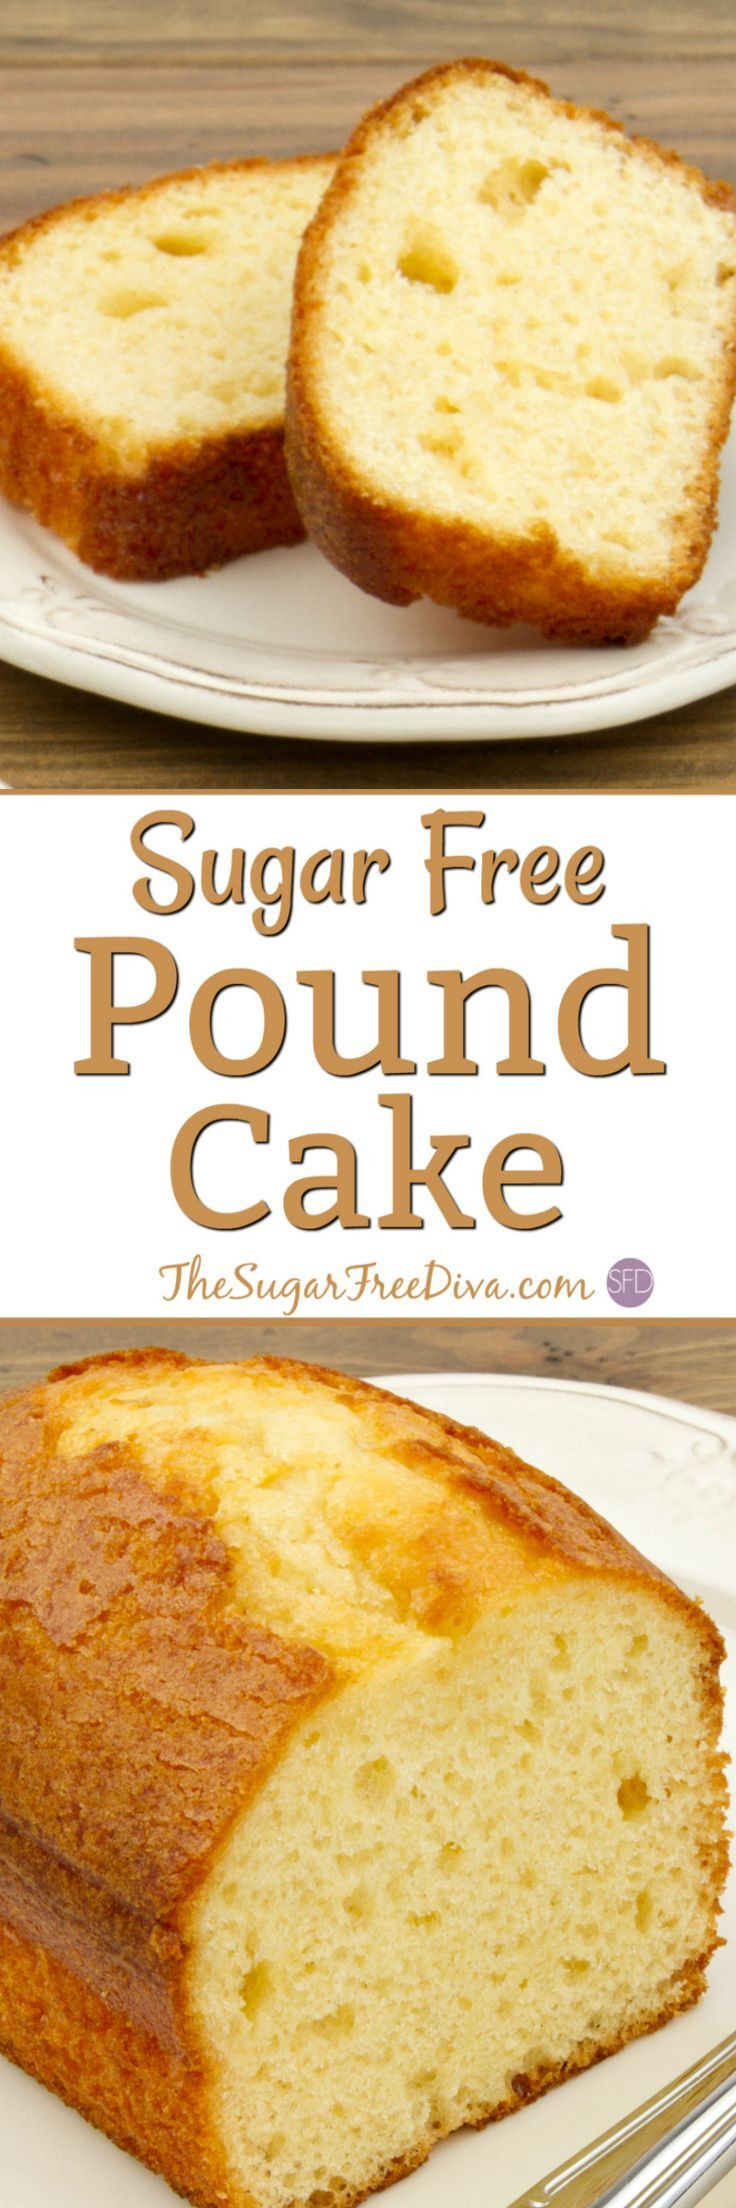 Diabetic Pound Cake Recipe
 A favorite cake recipe for many Pound cake only this